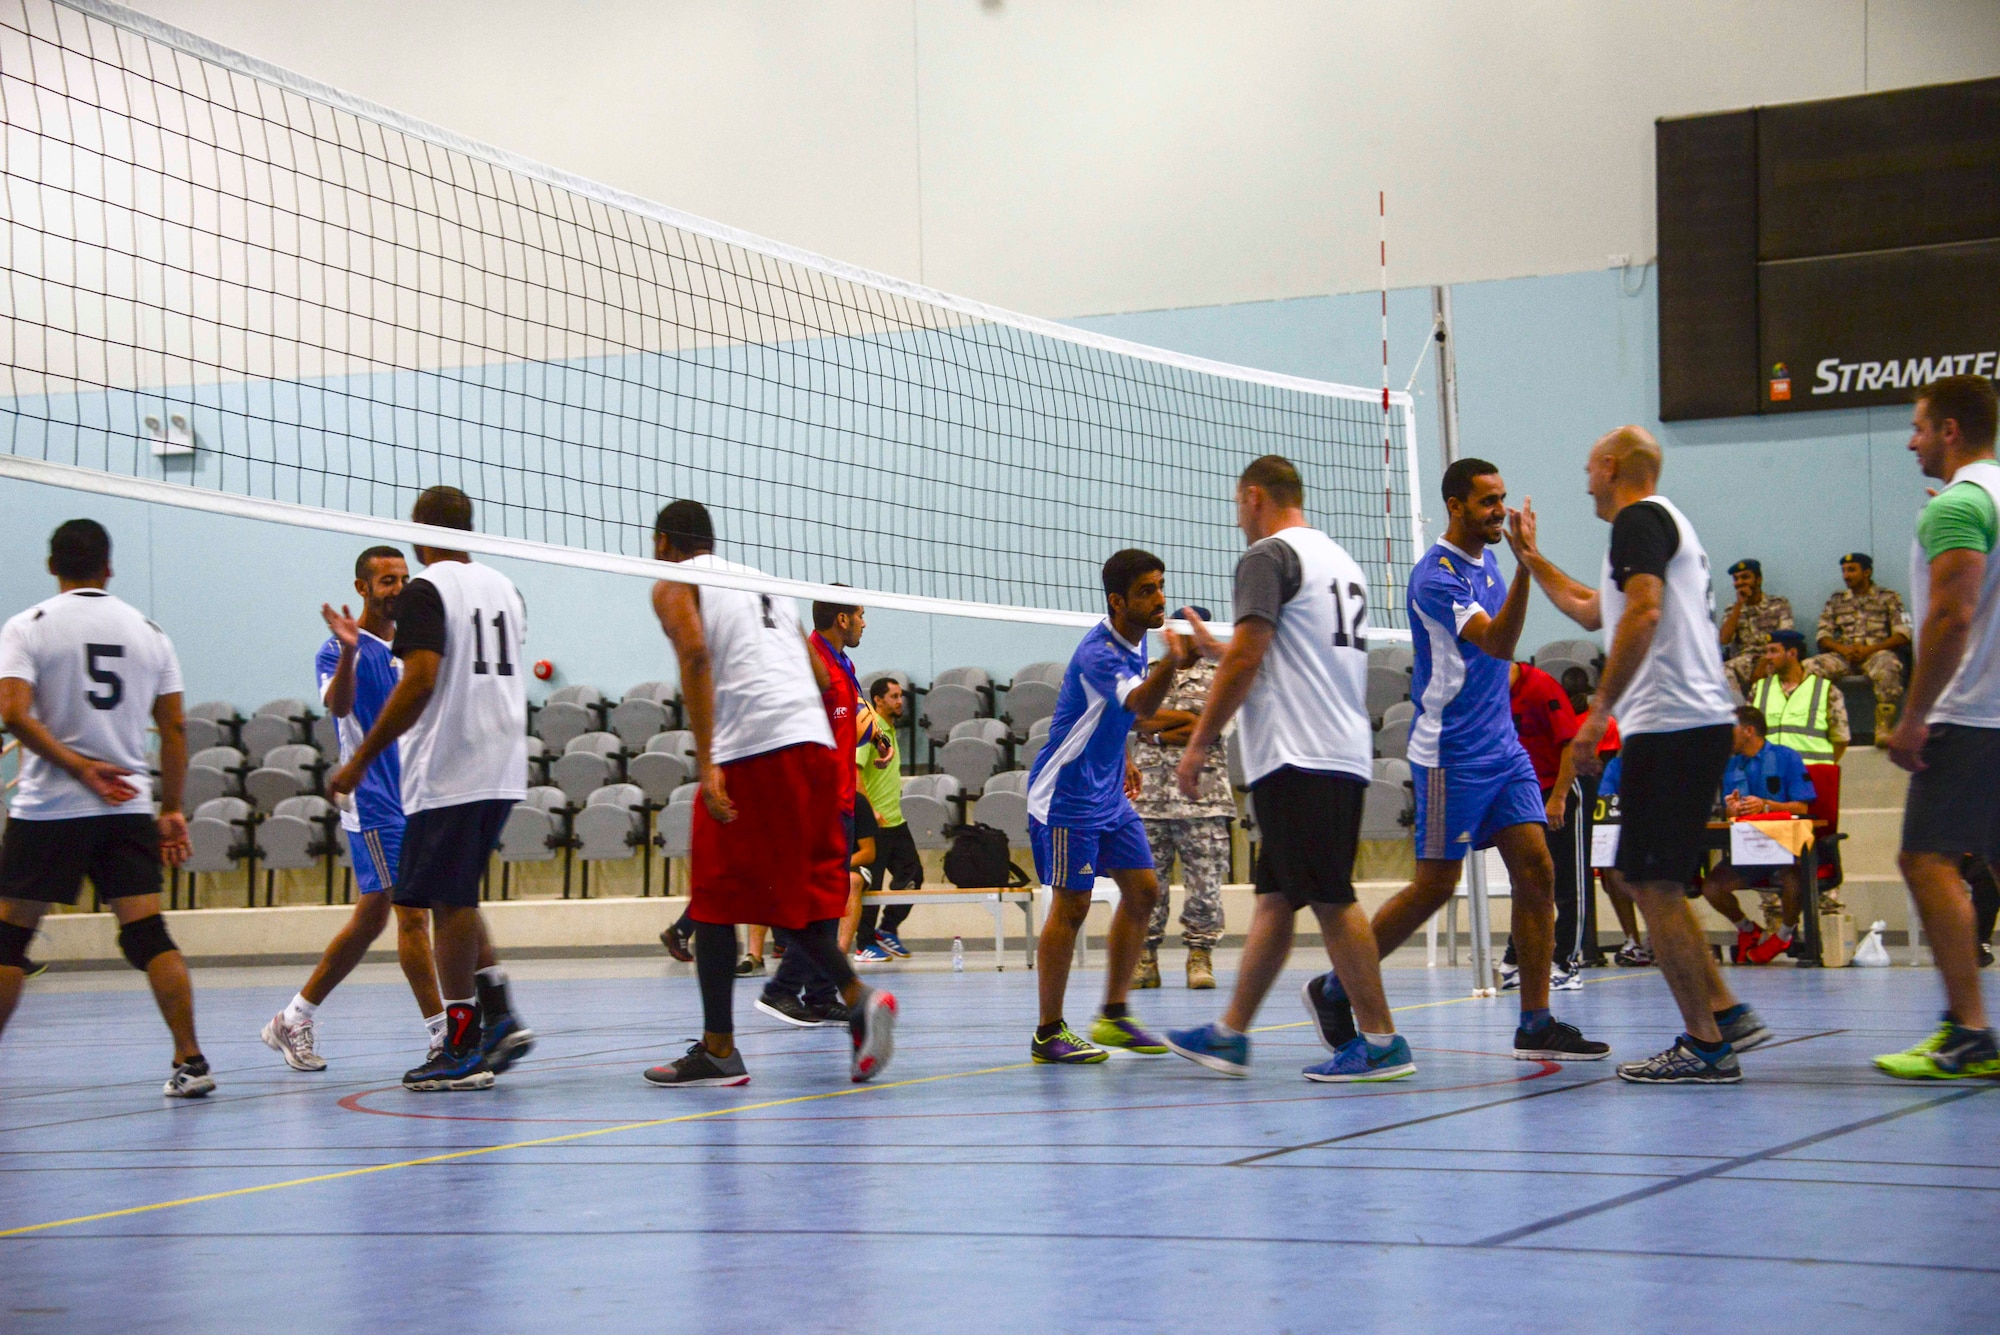 Members of Al Udeid Air Base and Qatar Emiri Air Force greet each other prior to a volleyball tournament June 2, 2016, at Al Udeid Air Base, Qatar. The QEAF hosted the volleyball match and followed it with a breakfast to help strengthen the partnership and build friendships between the U.S. and Qatari military. The match allowed the players to learn more about each other personally and culturally. (U.S. Air Force photo/Senior Airman Janelle Patiño/Released)